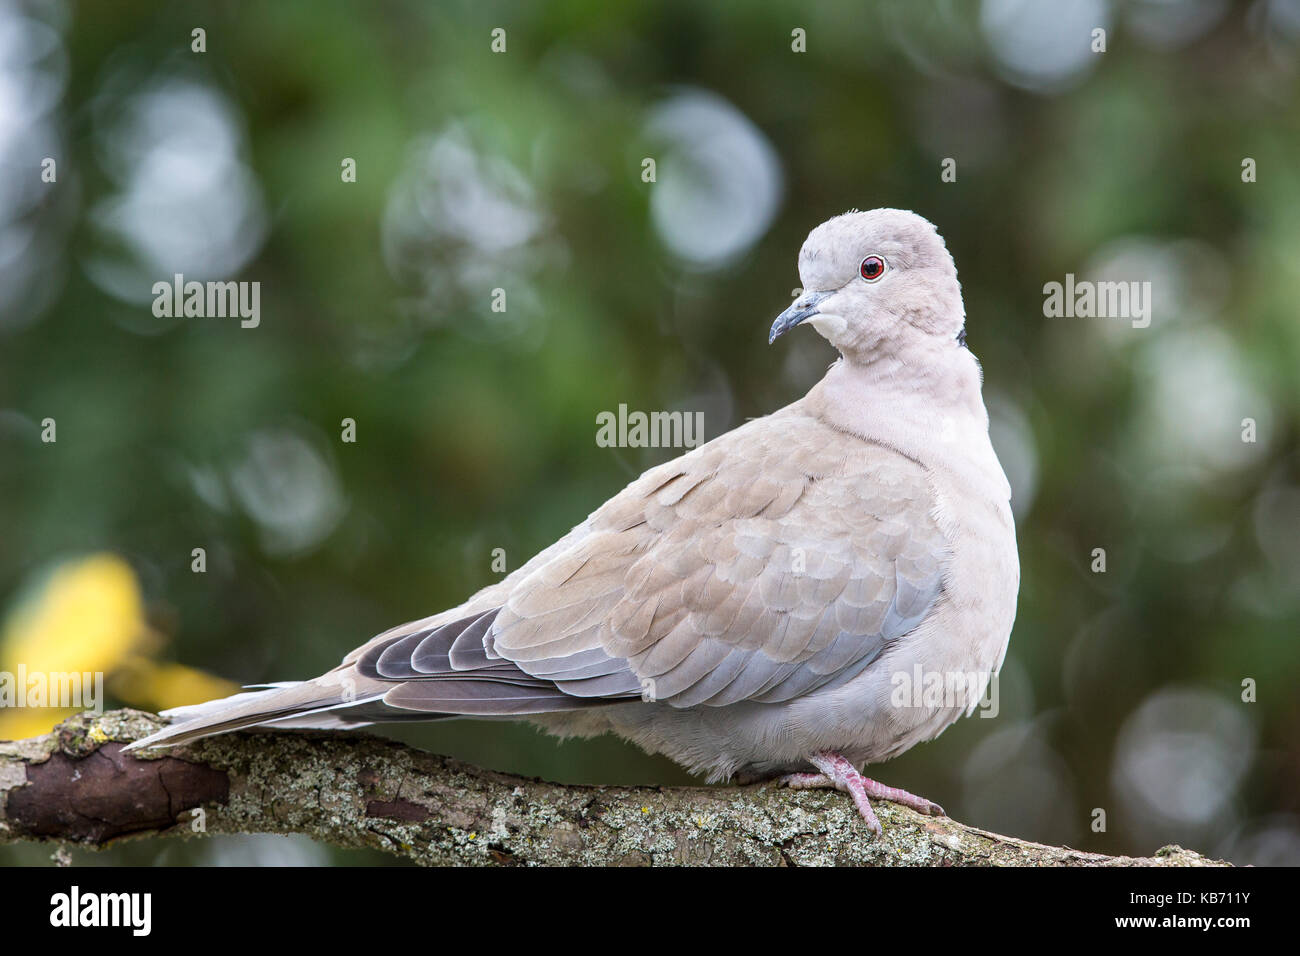 Eurasian Collared Dove (Streptopelia decaocto) perching on a branch, United Kingdom, Essex Stock Photo